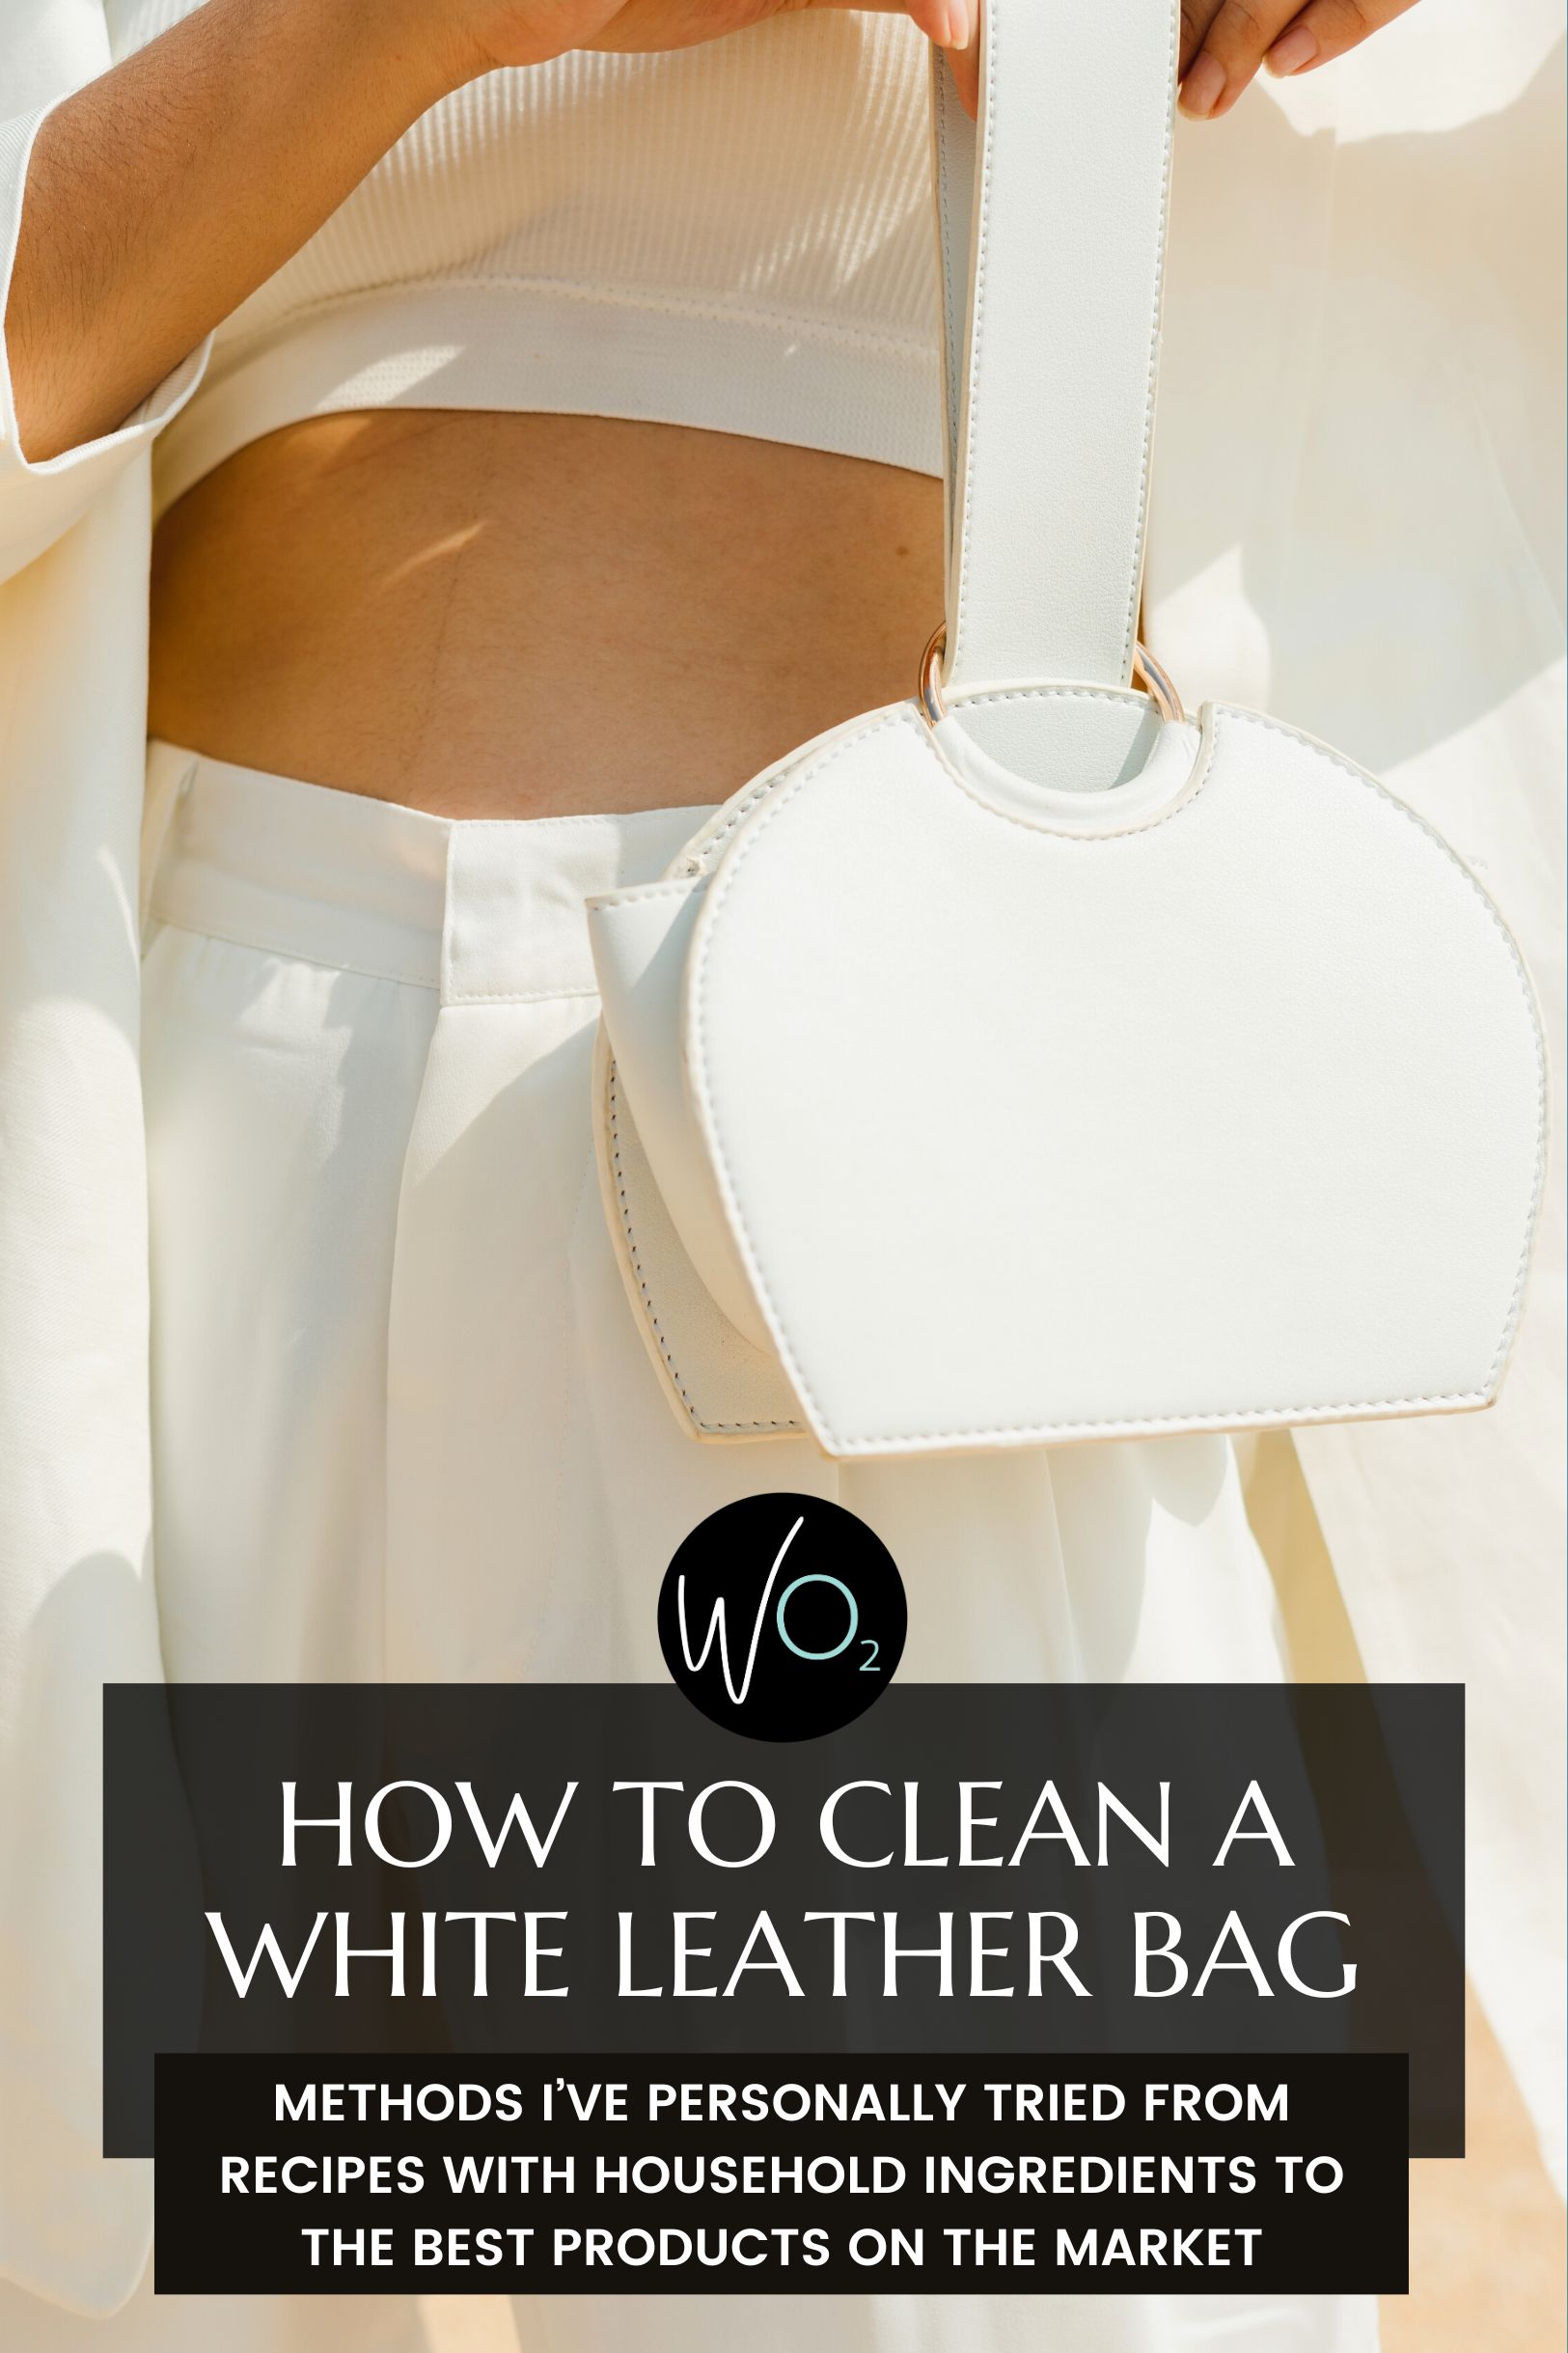 How to Clean a White Leather Bag [4 Simple Solutions]